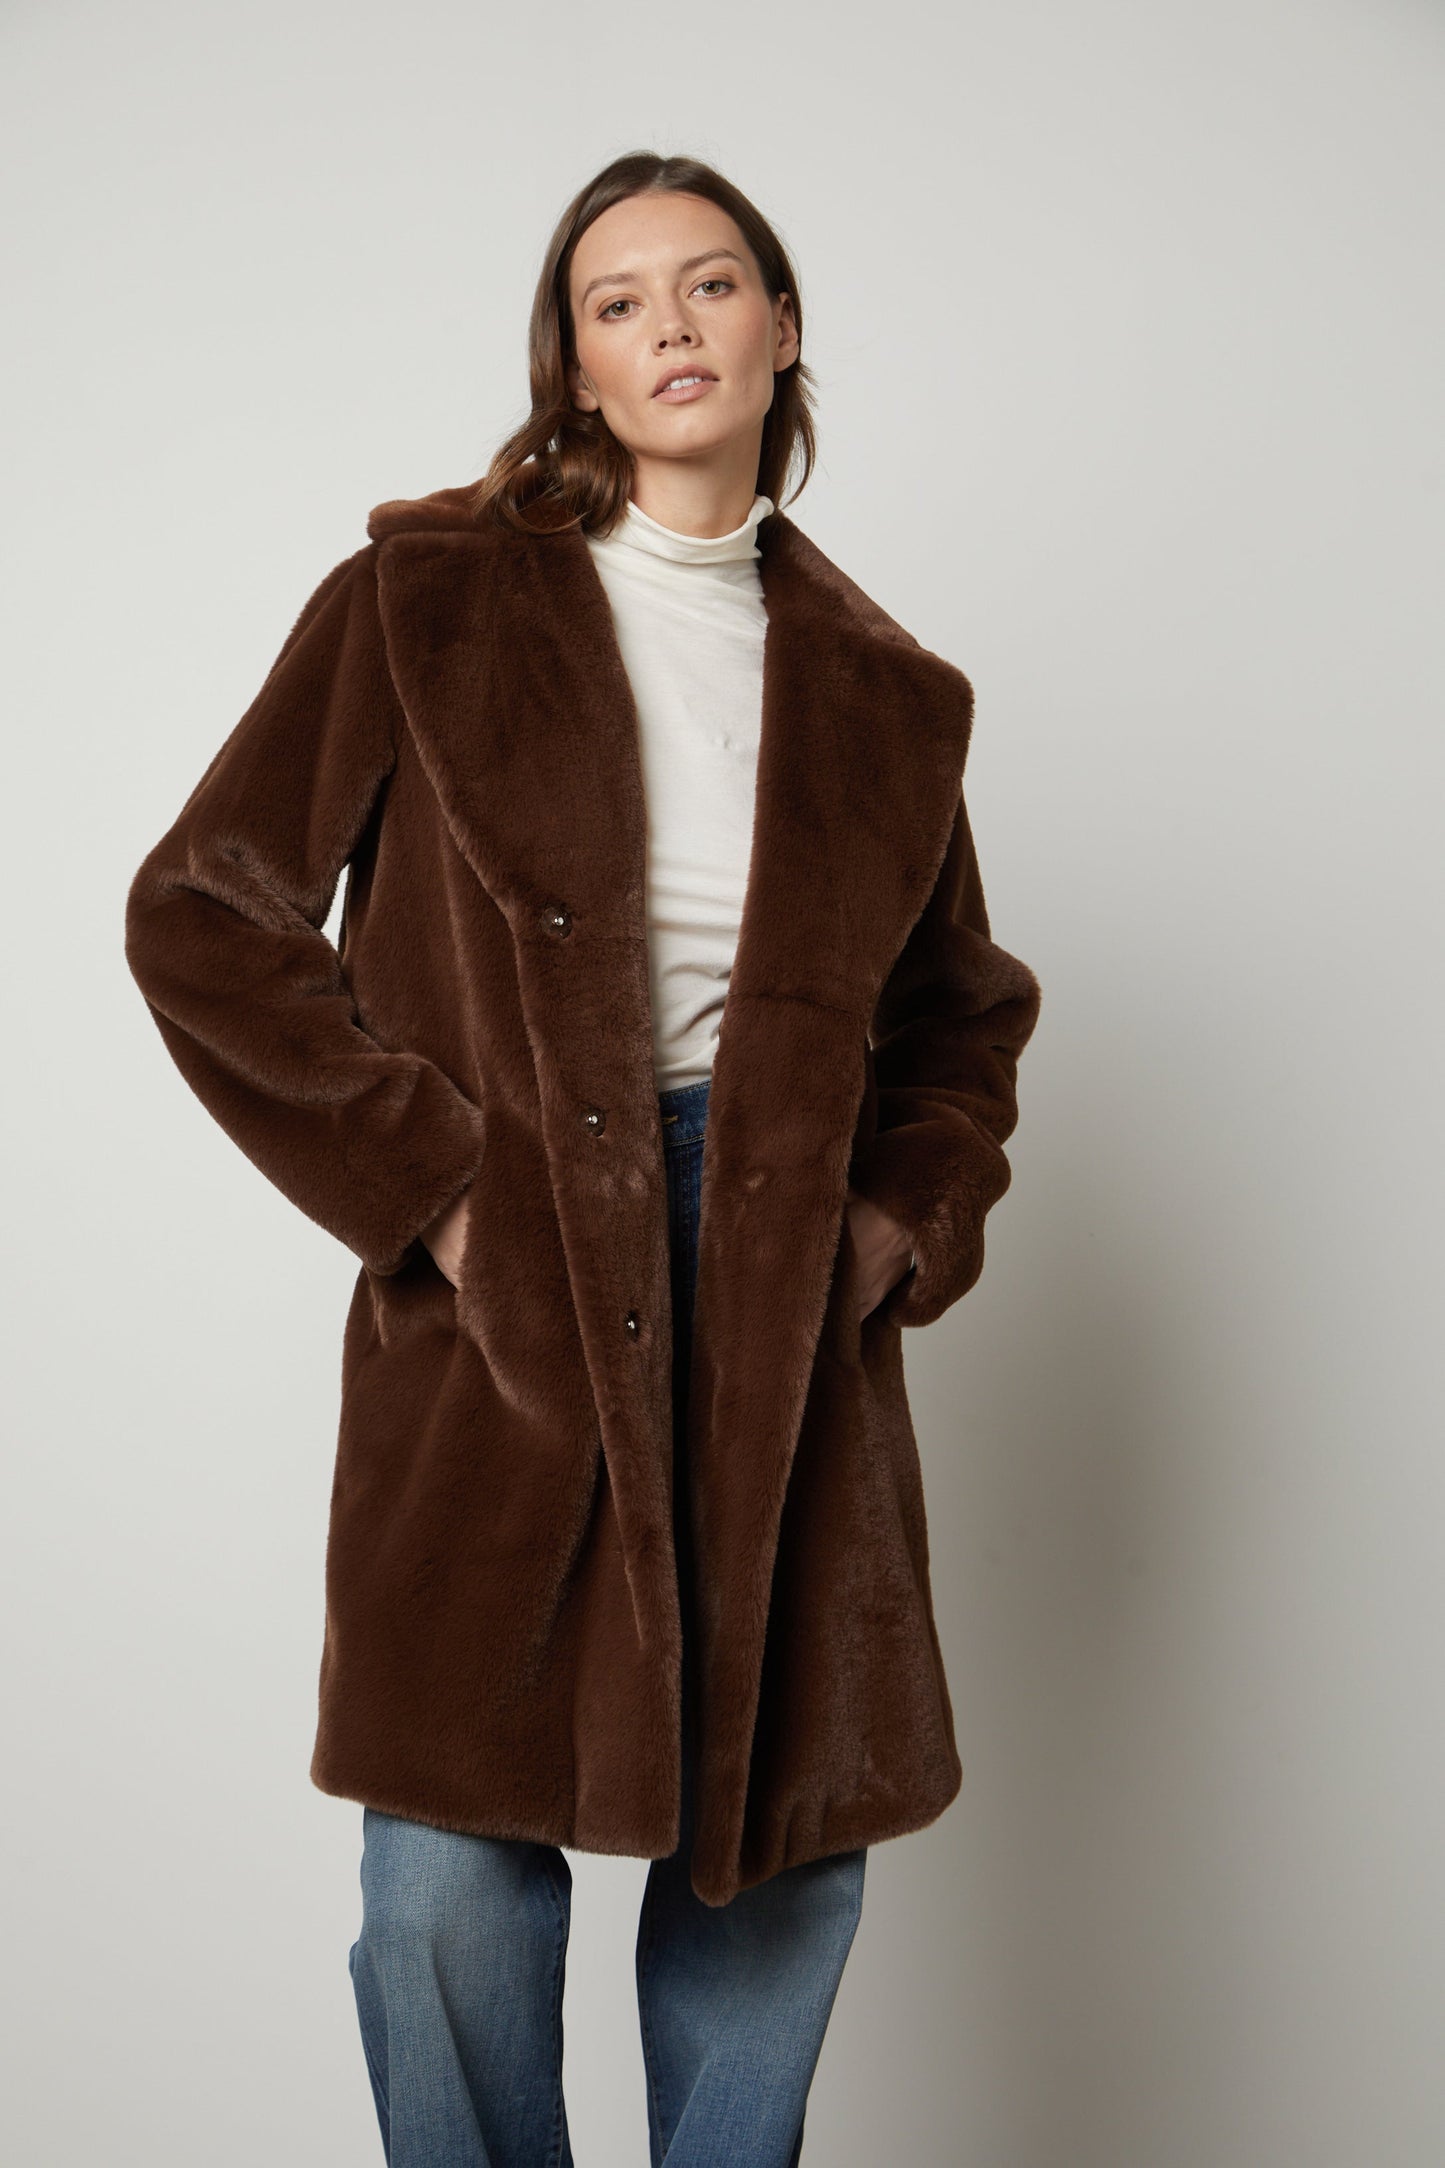 A model wearing a Brown EVALYN LUX FAUX FUR COAT by Velvet by Graham & Spencer strikes a silhouette.-35782812664001